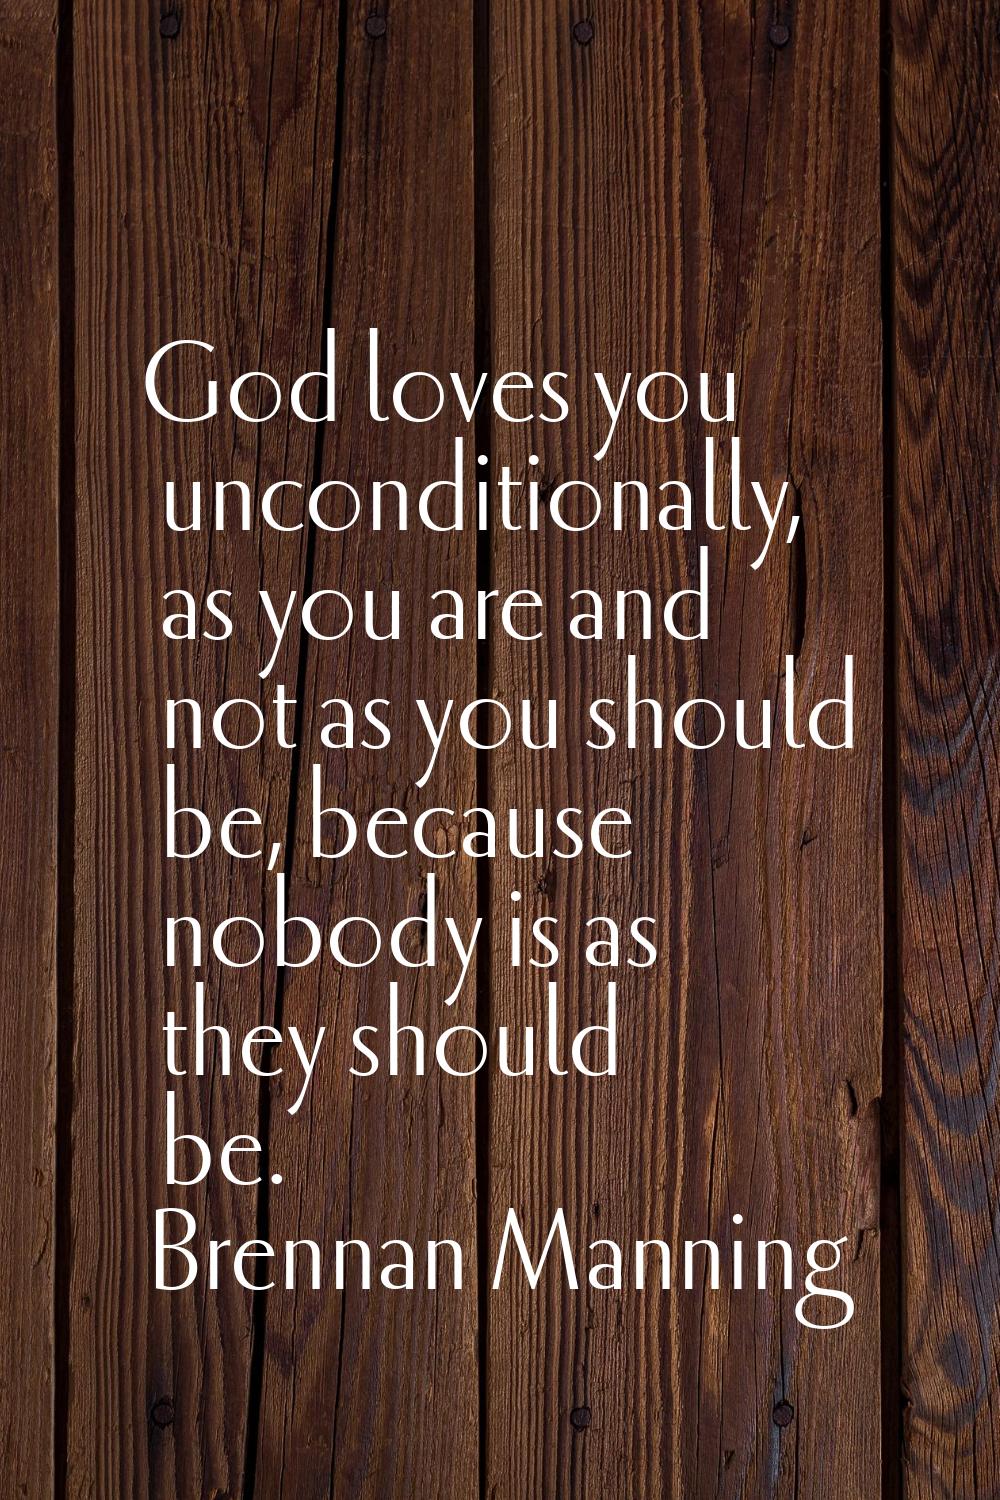 God loves you unconditionally, as you are and not as you should be, because nobody is as they shoul